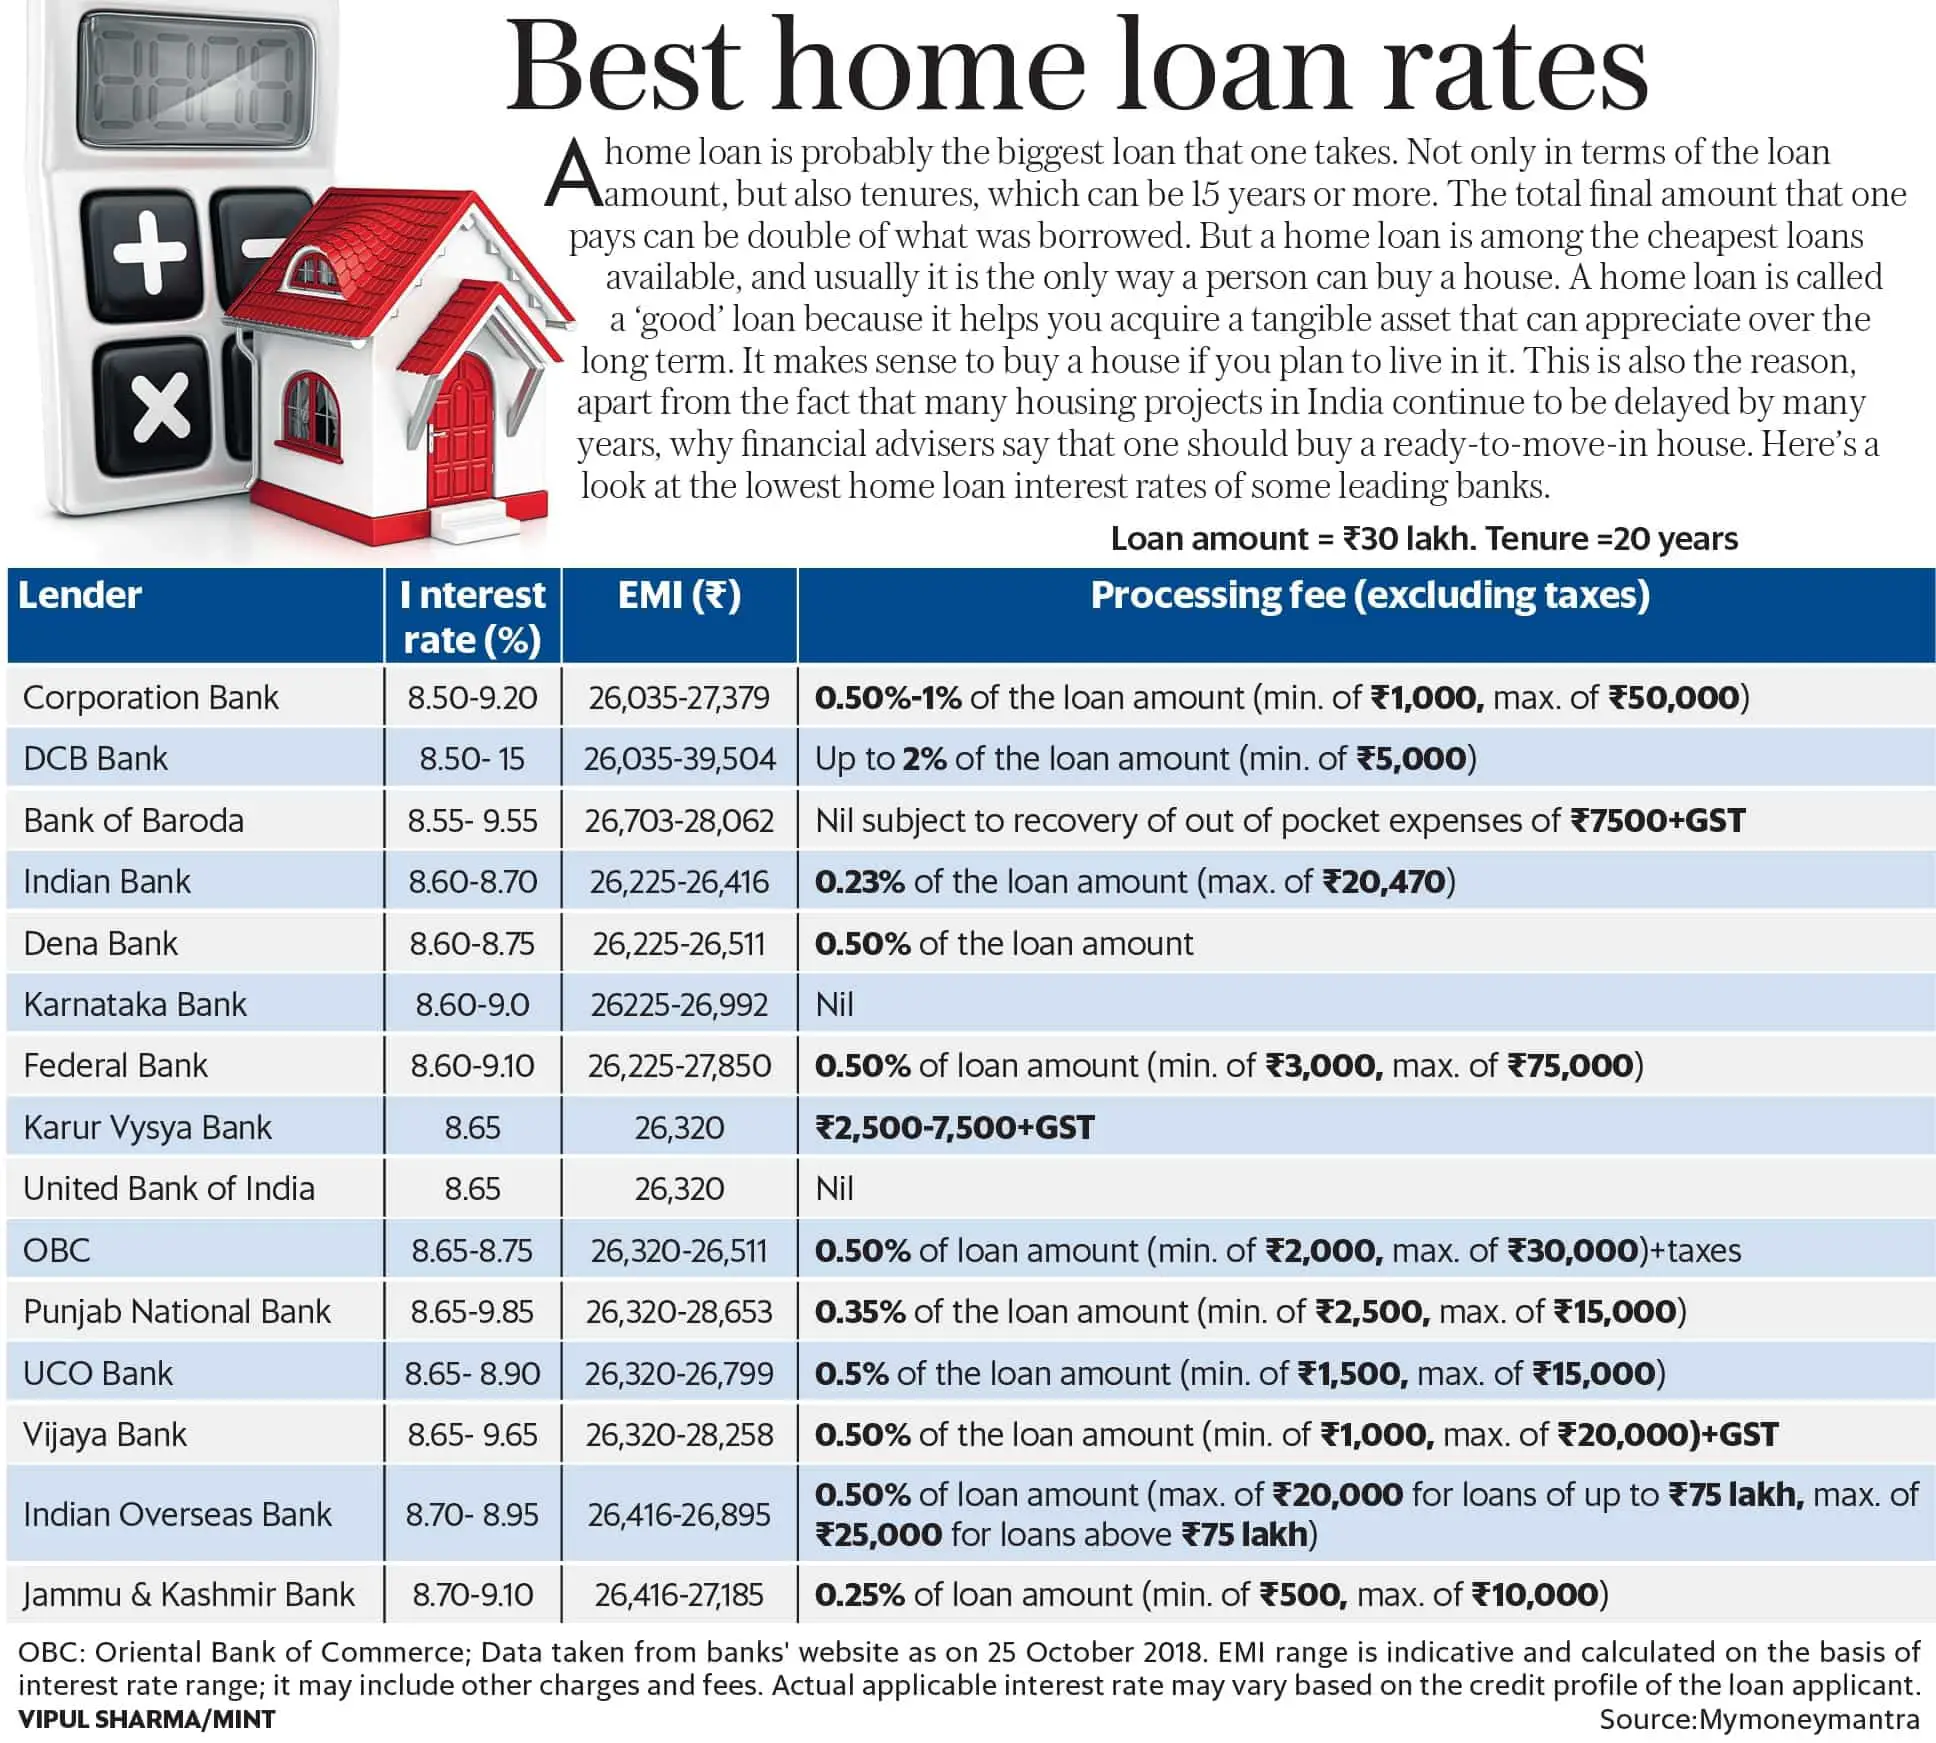 The best home loan rates being offered right now